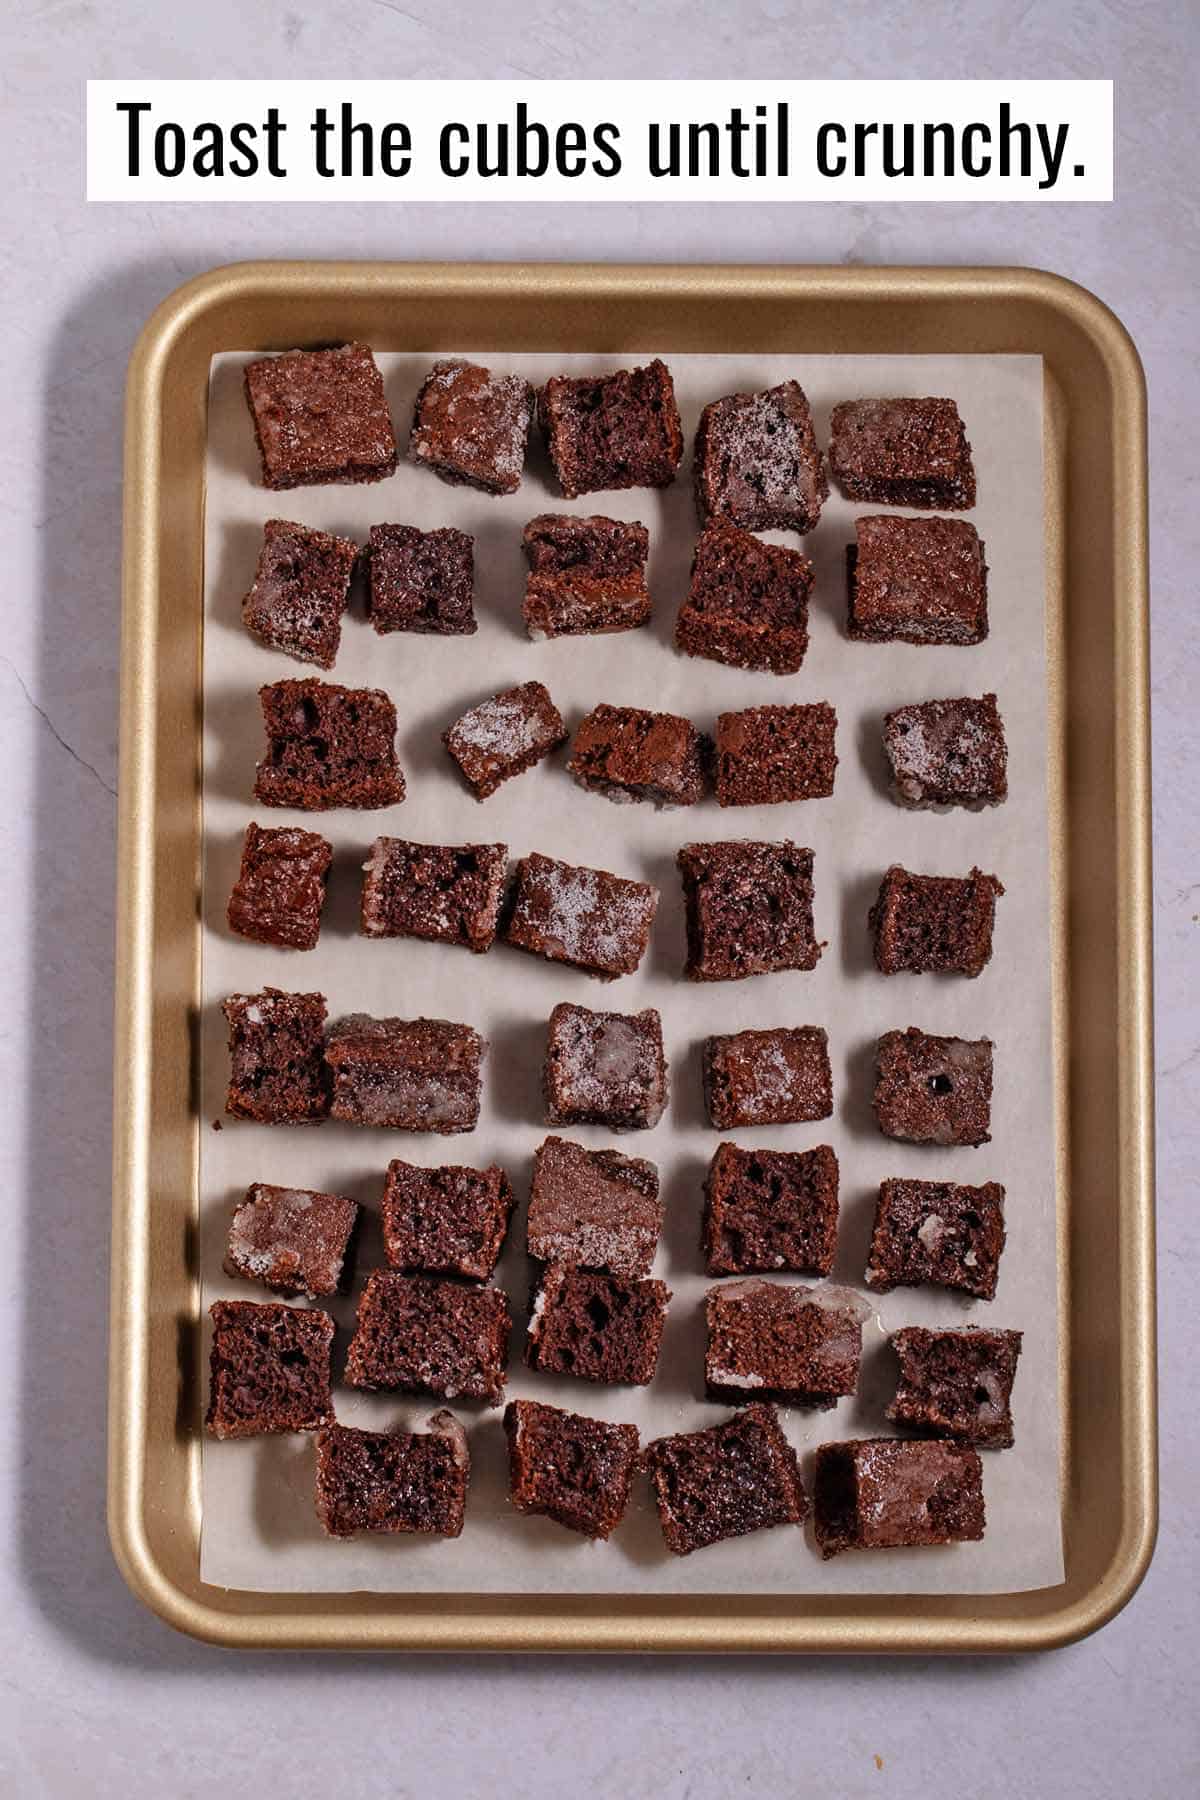 Toasted chocolate cake croutons on a baking sheet.